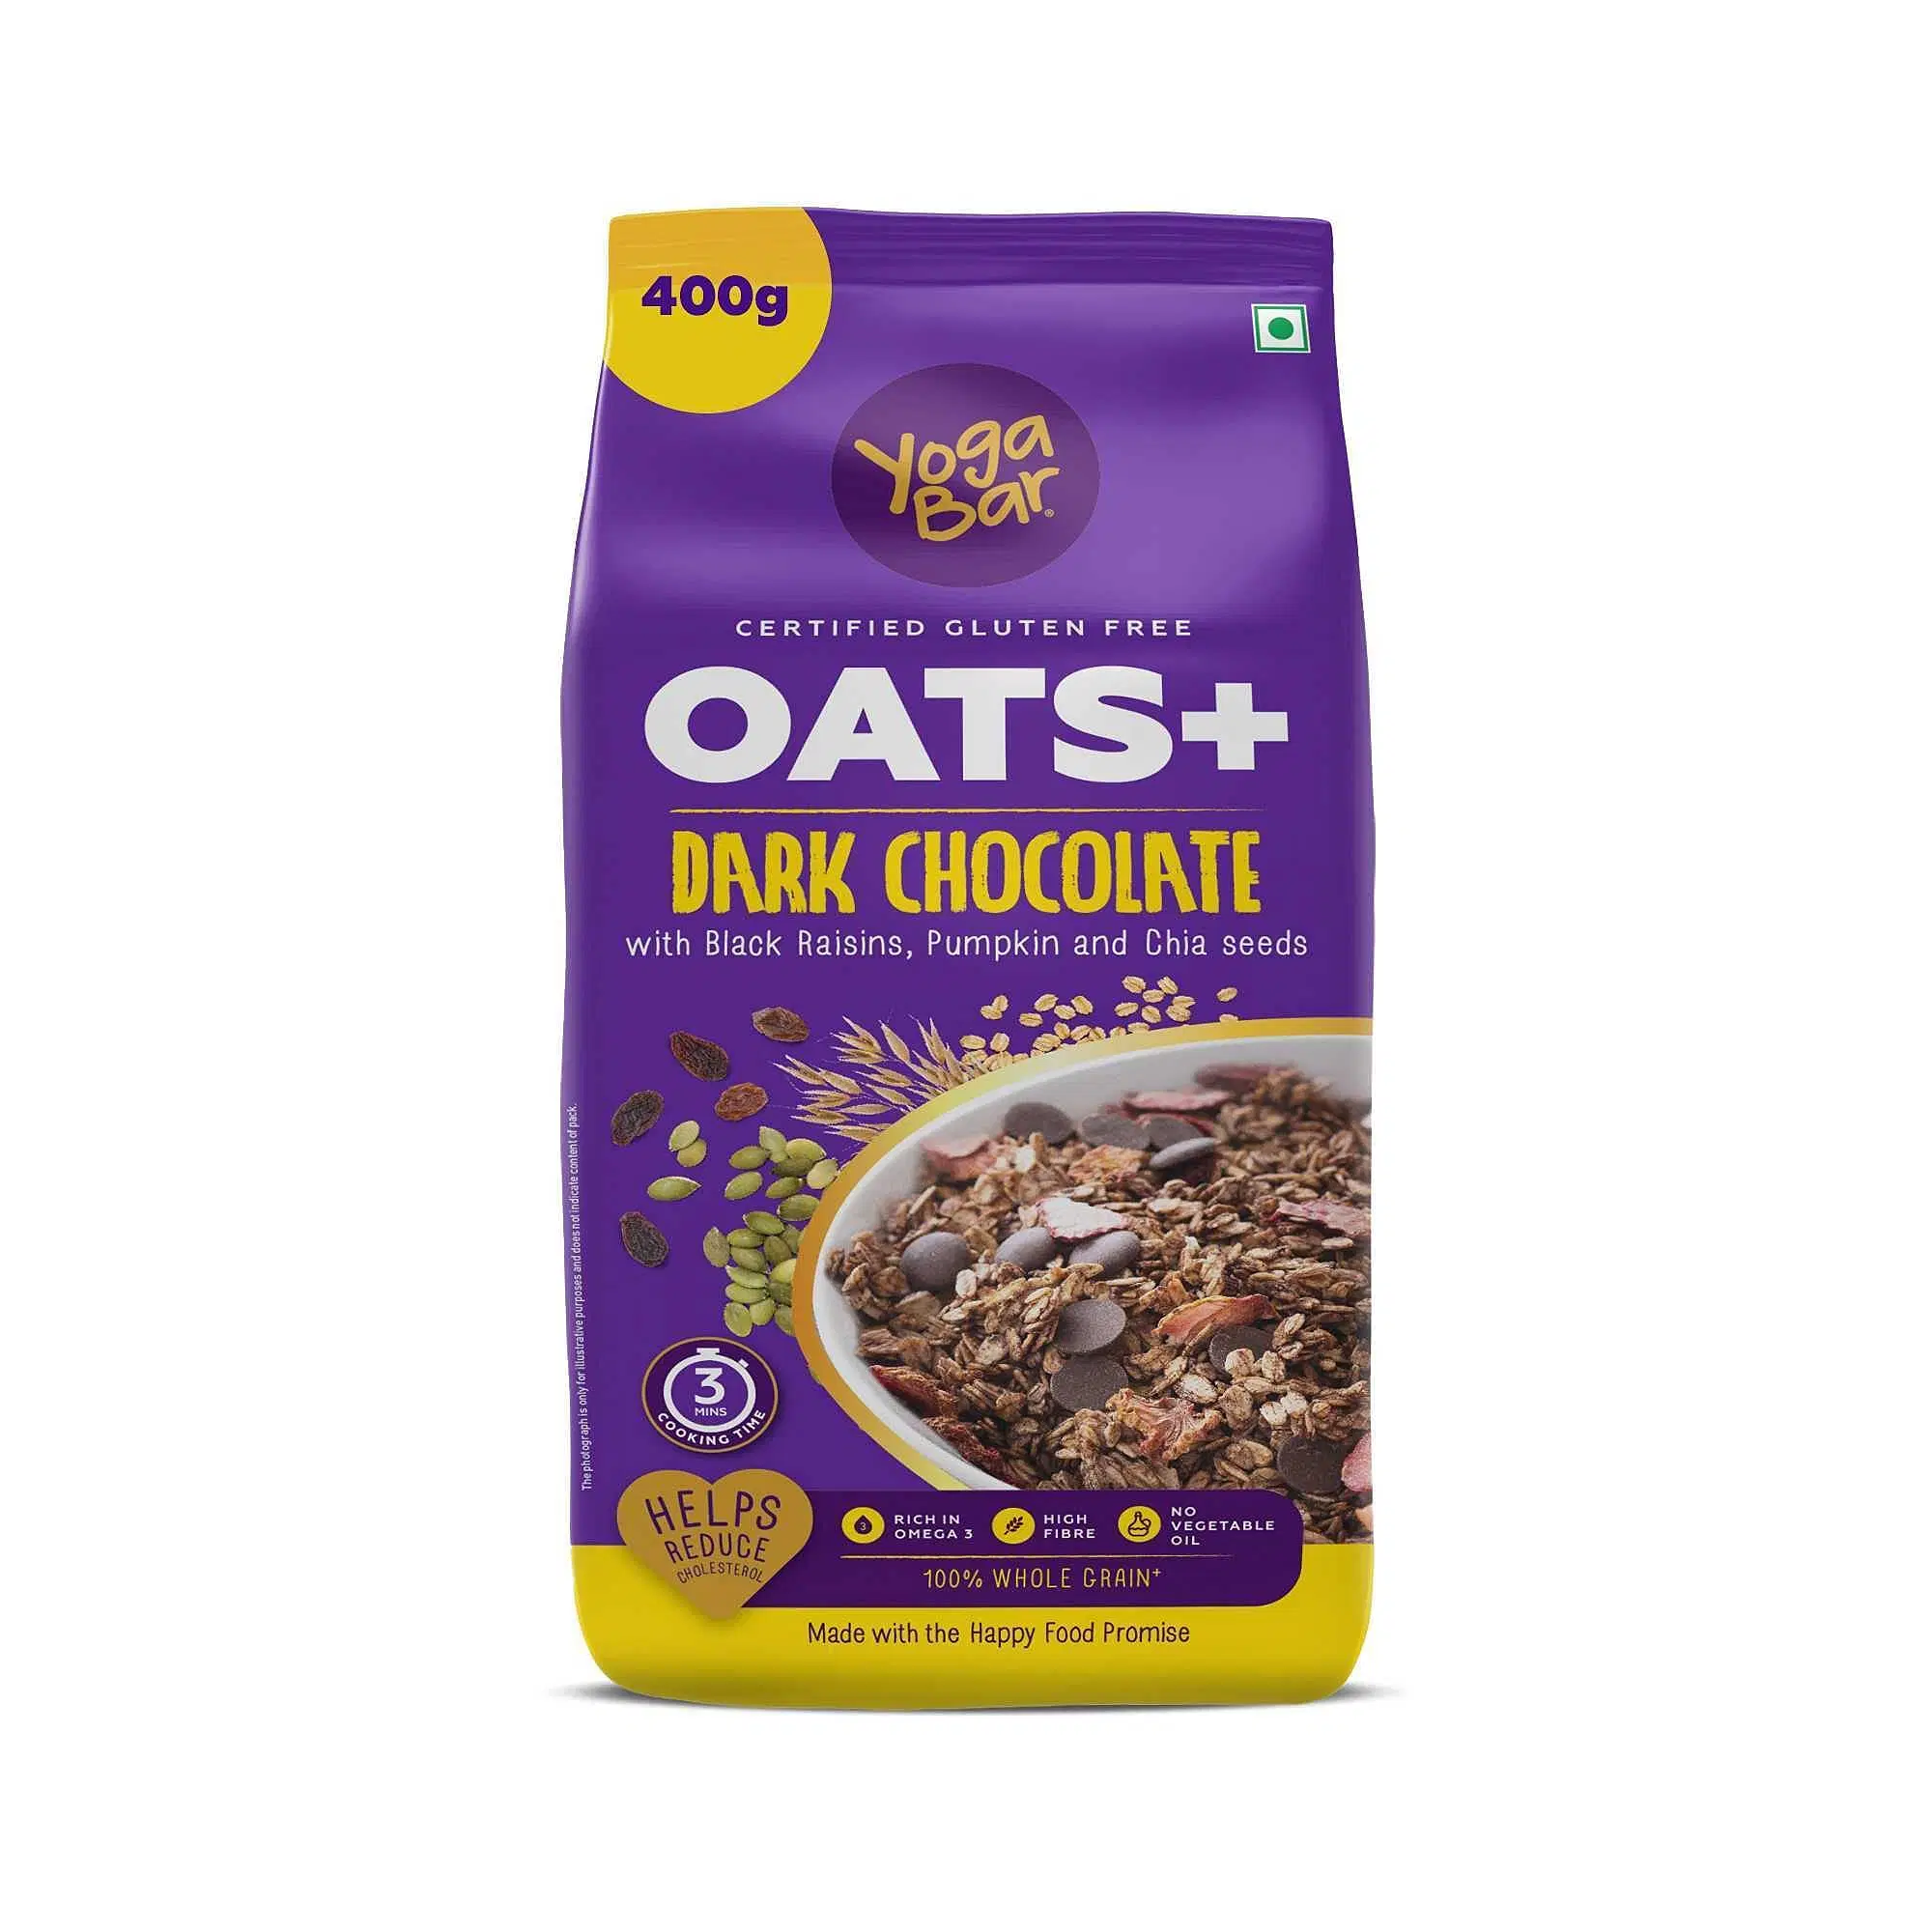 Buy Yogabar 20g Chocolate Protein Oats 850g - Rolled oats 400 Pouch